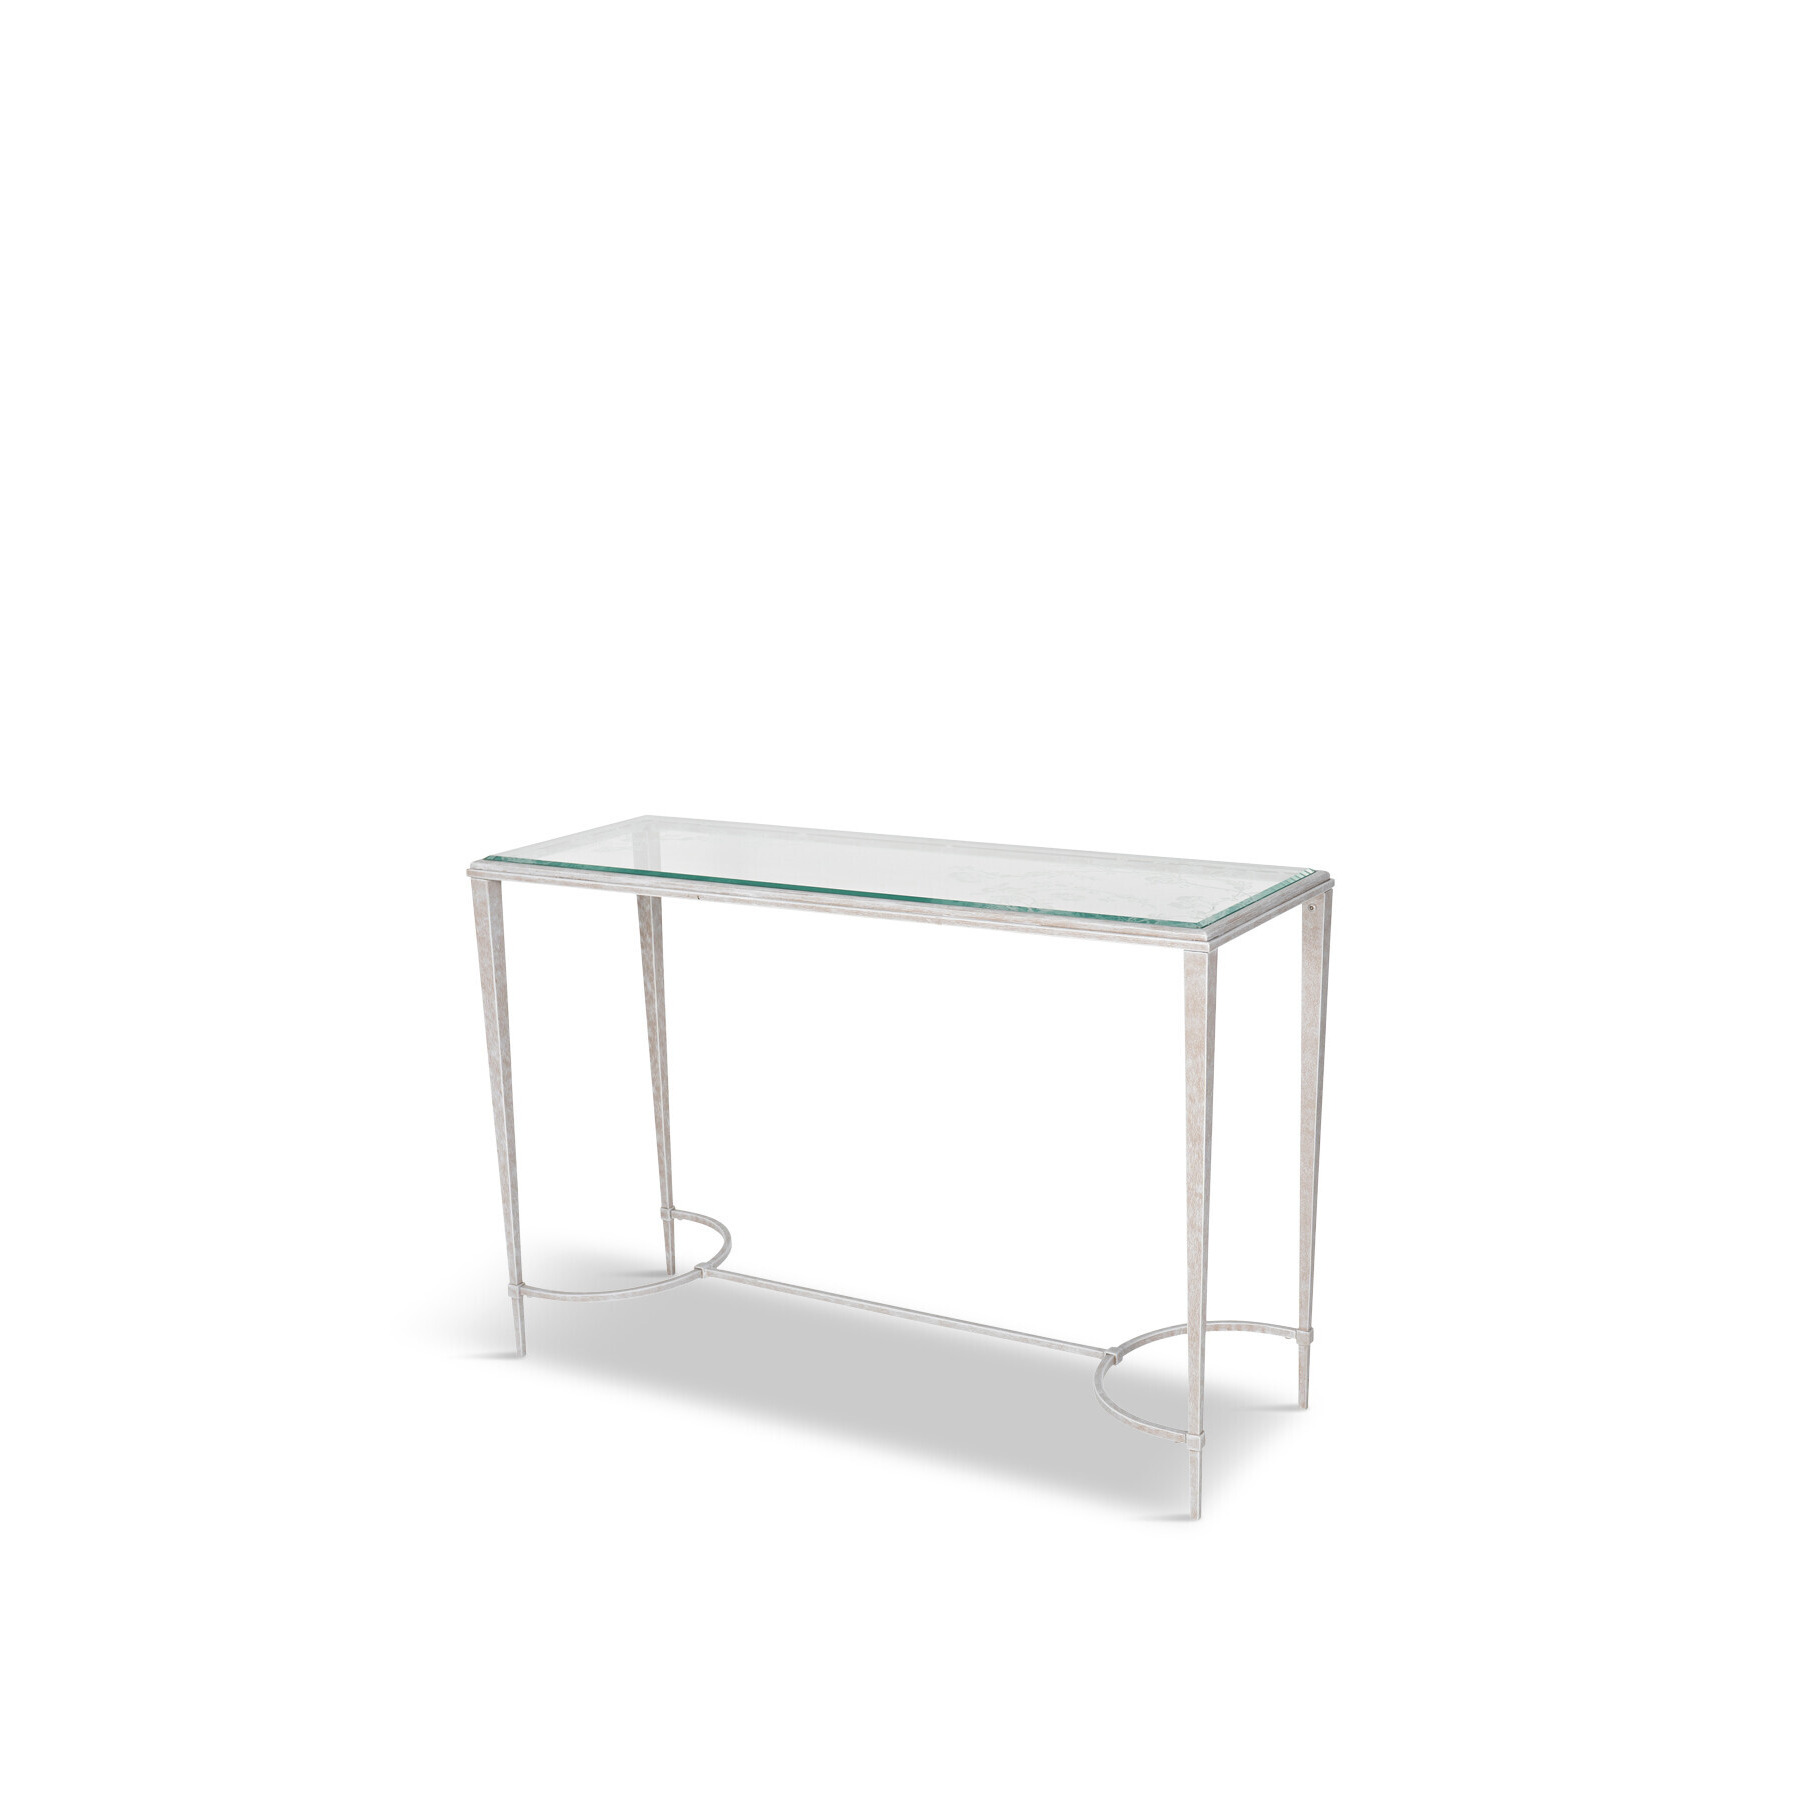 Laura Ashley Aria Etched Glass Distressed White Iron Console Table - Size 110x40x74 Multi - image 1